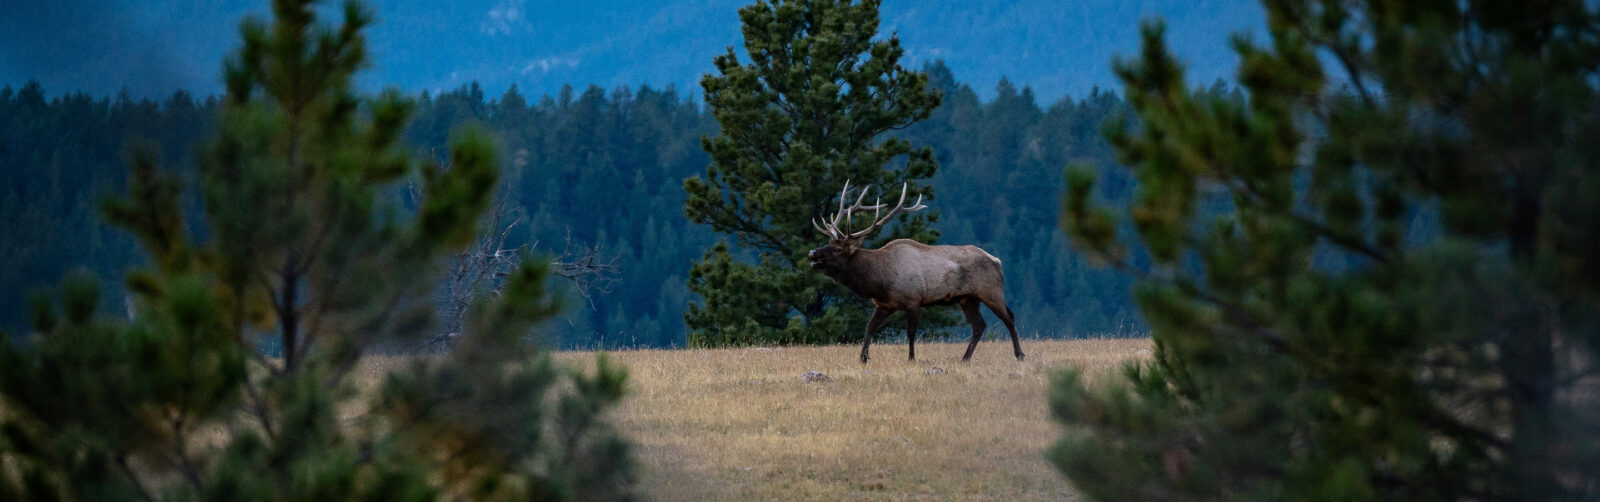 An elk in a field with pine trees